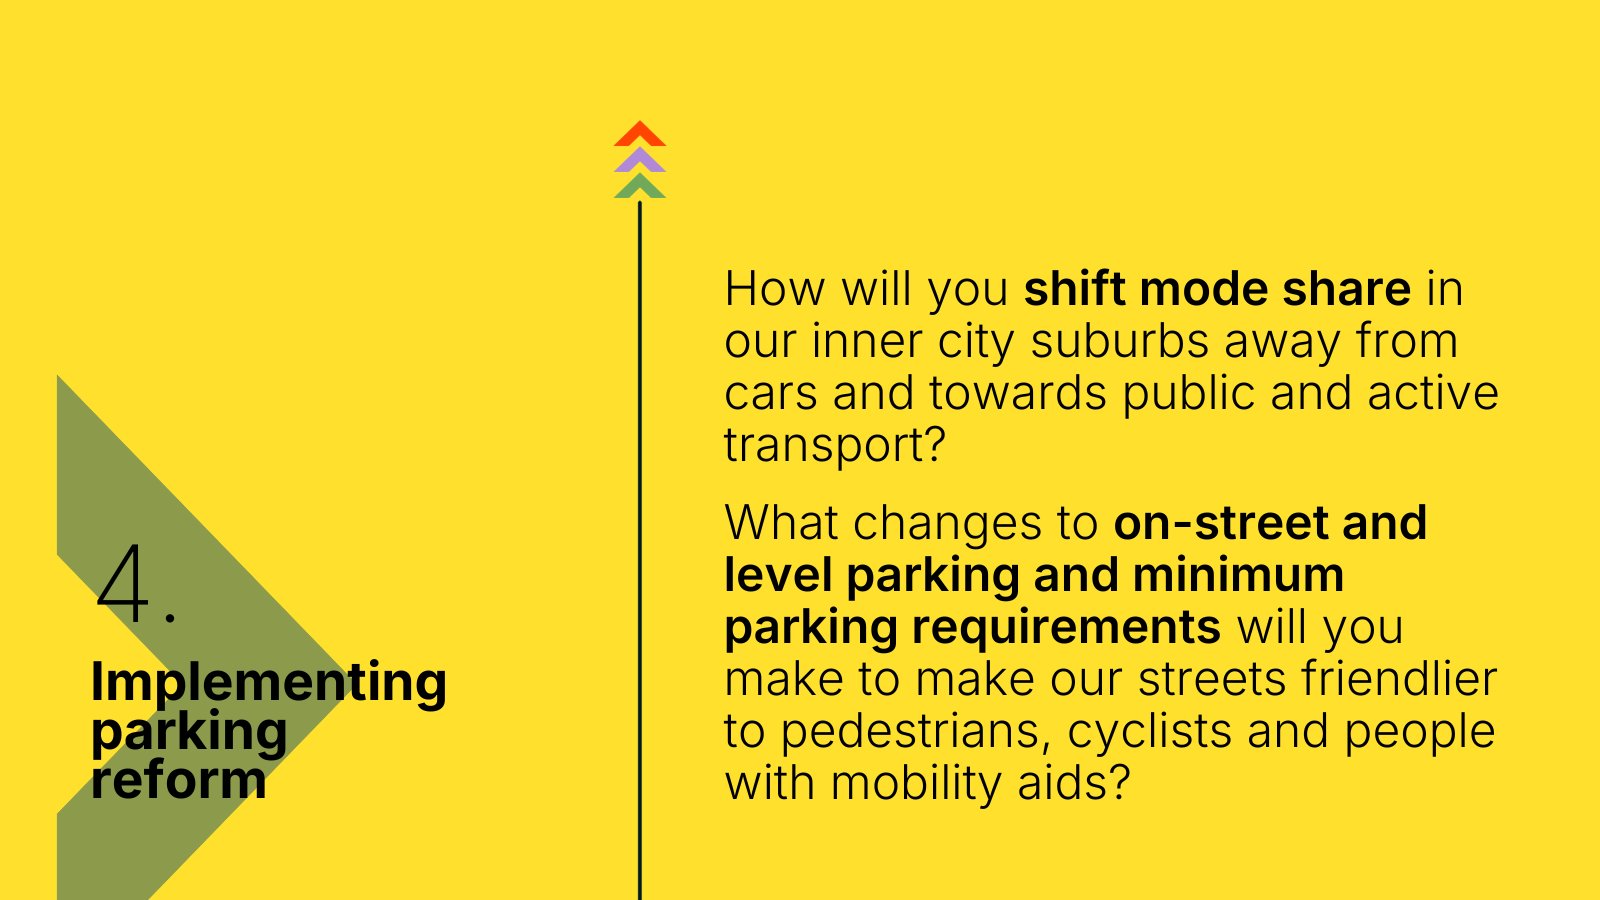 How will you shift mode share in our inner city suburbs away from cars and towards public and active
transport? What changes to on-street and level parking and minimum parking requirements will you make to make our streets friendlier to pedestrians, cyclists and people
with mobility aids?